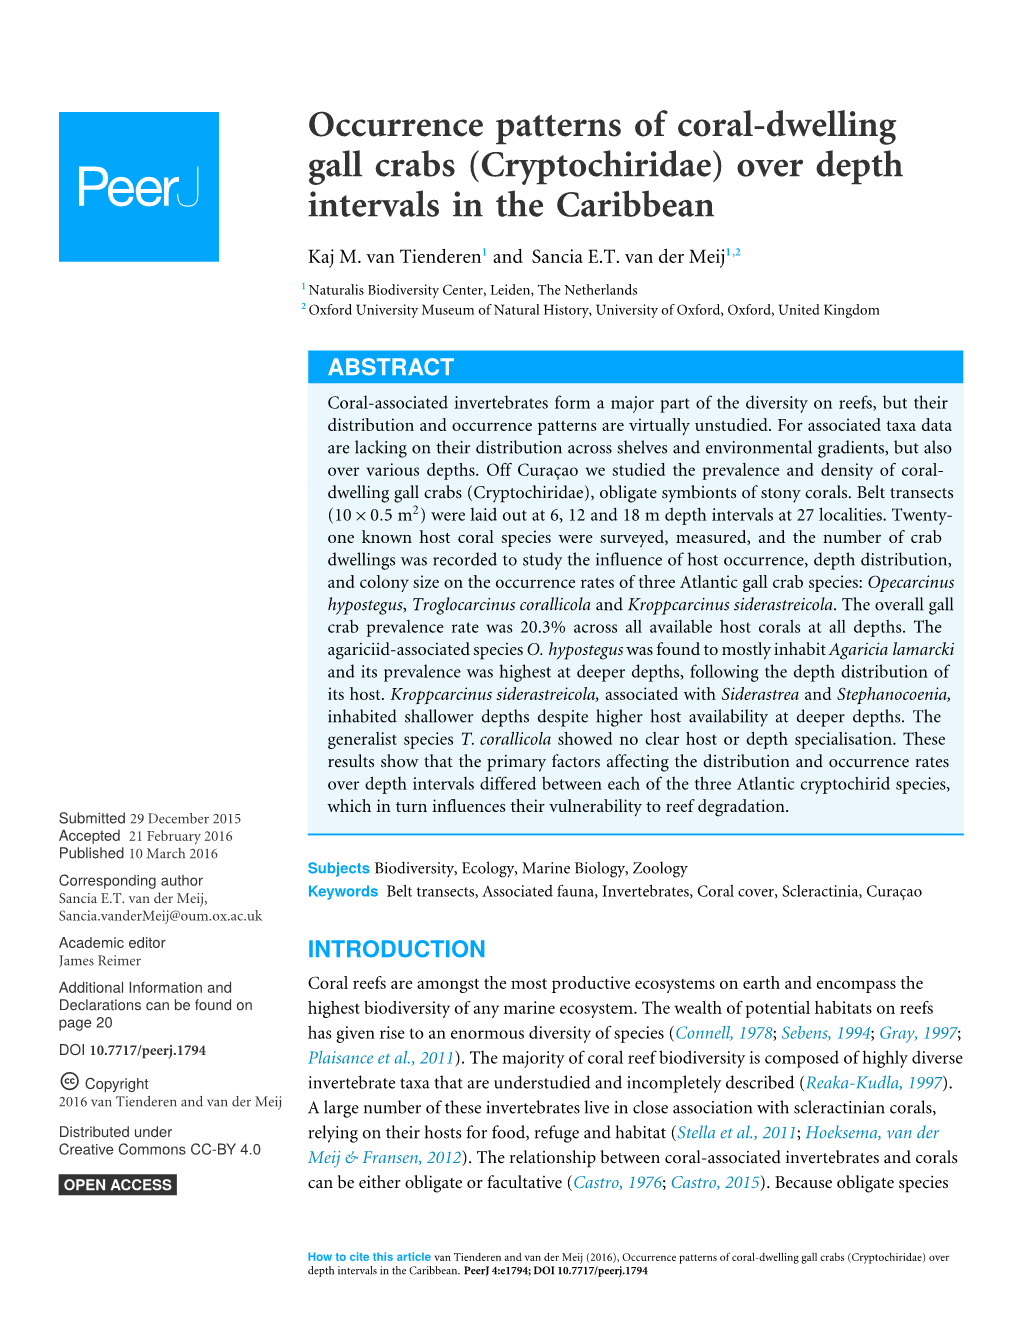 Occurrence Patterns of Coral-Dwelling Gall Crabs (Cryptochiridae) Over Depth Intervals in the Caribbean